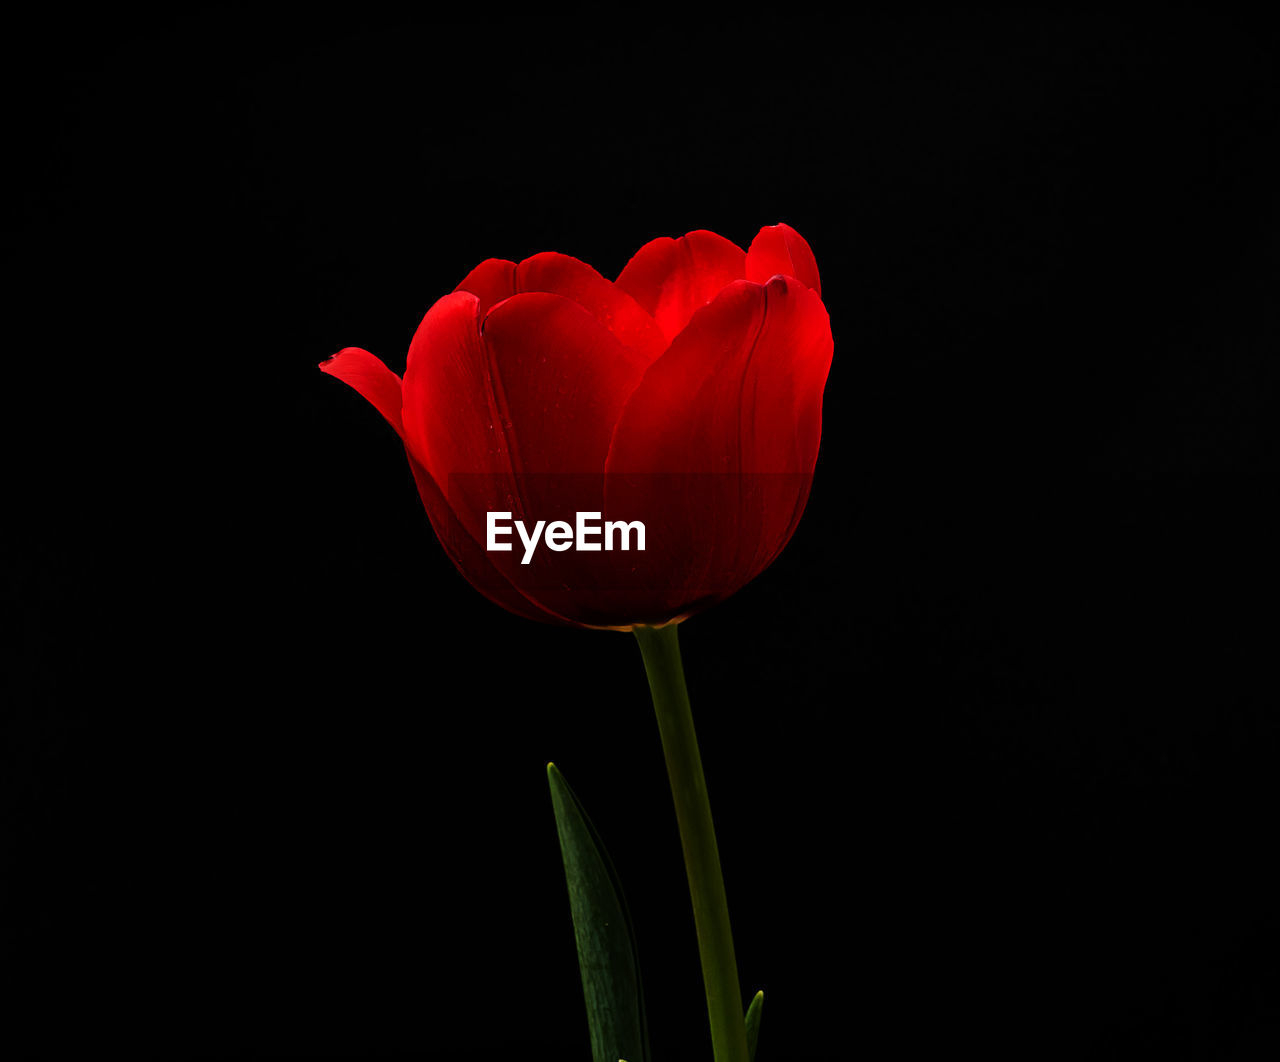 CLOSE-UP OF RED TULIPS AGAINST BLACK BACKGROUND